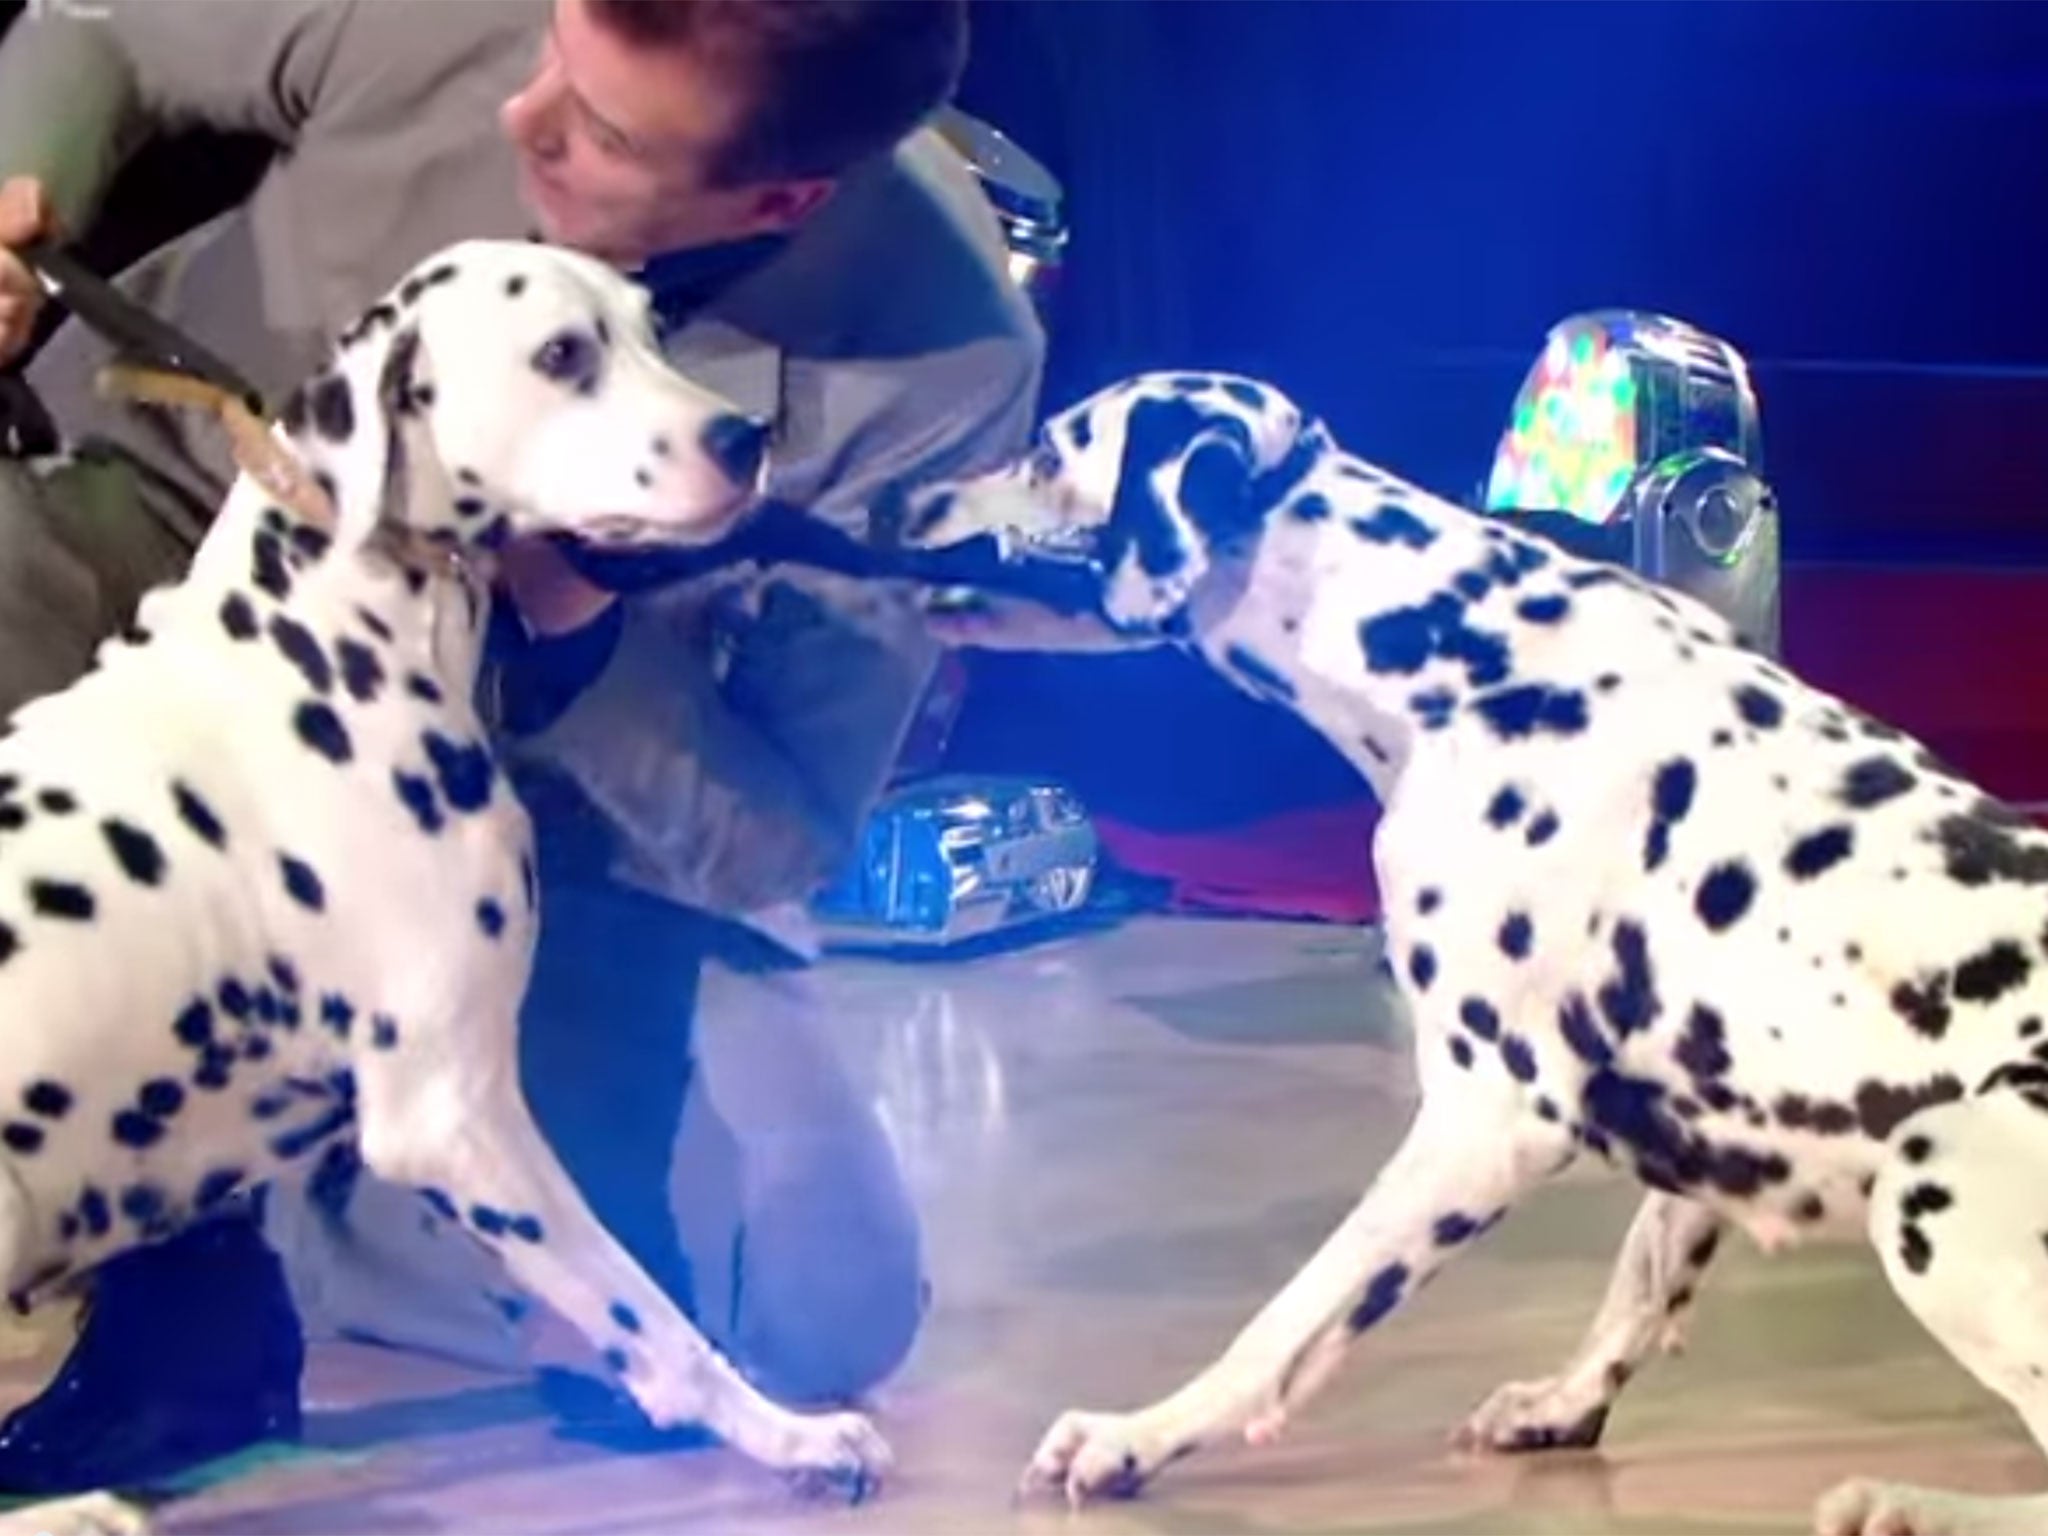 Dalmation dogs were used a Strictly Come Dancing performance, prompting complaints from viewers